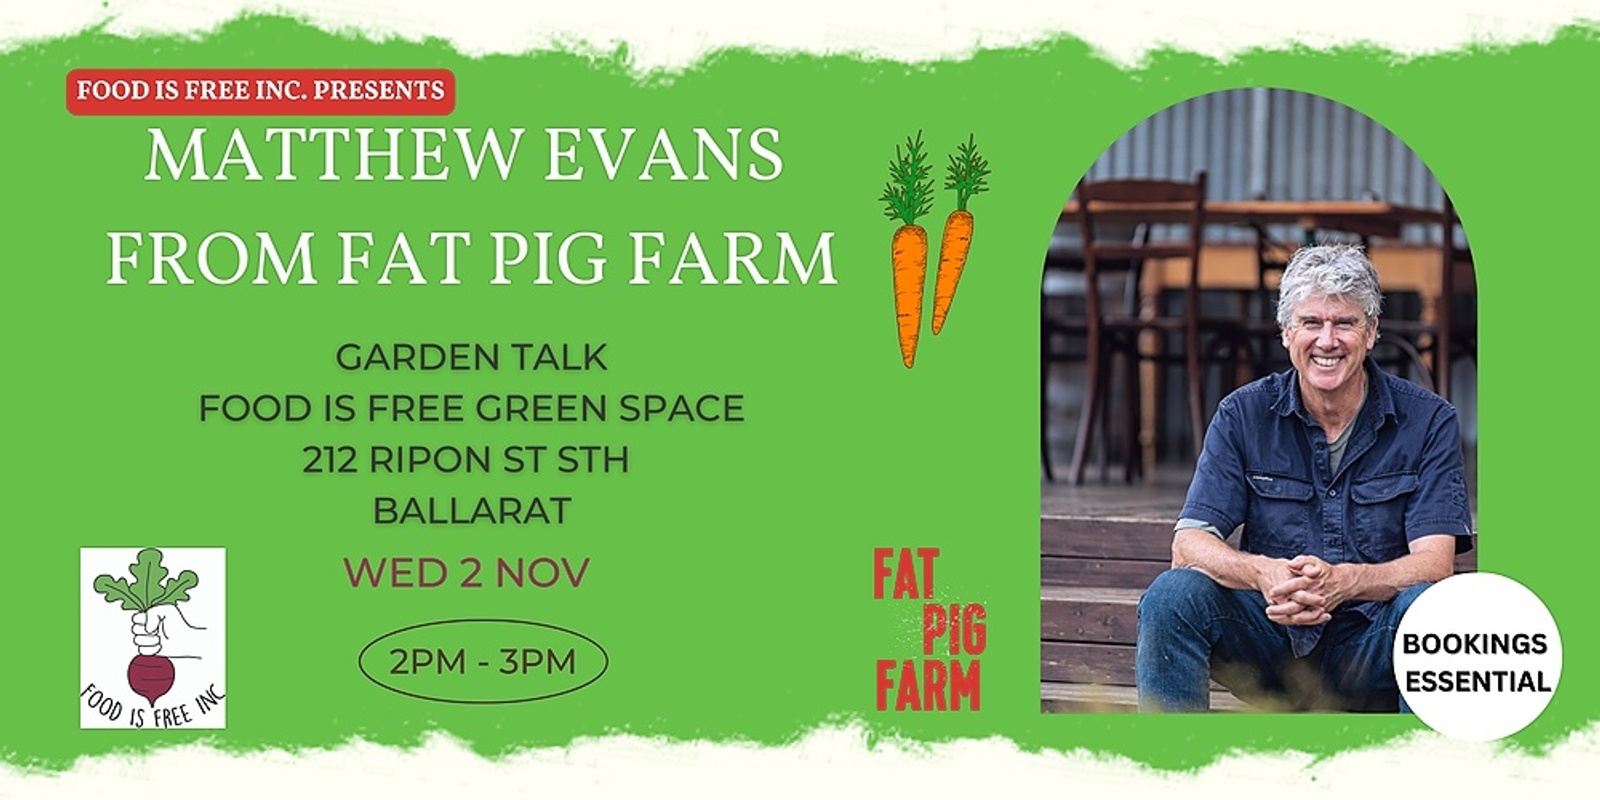 Banner image for Matthew Evans Garden Talk at Food Is Free Green Space